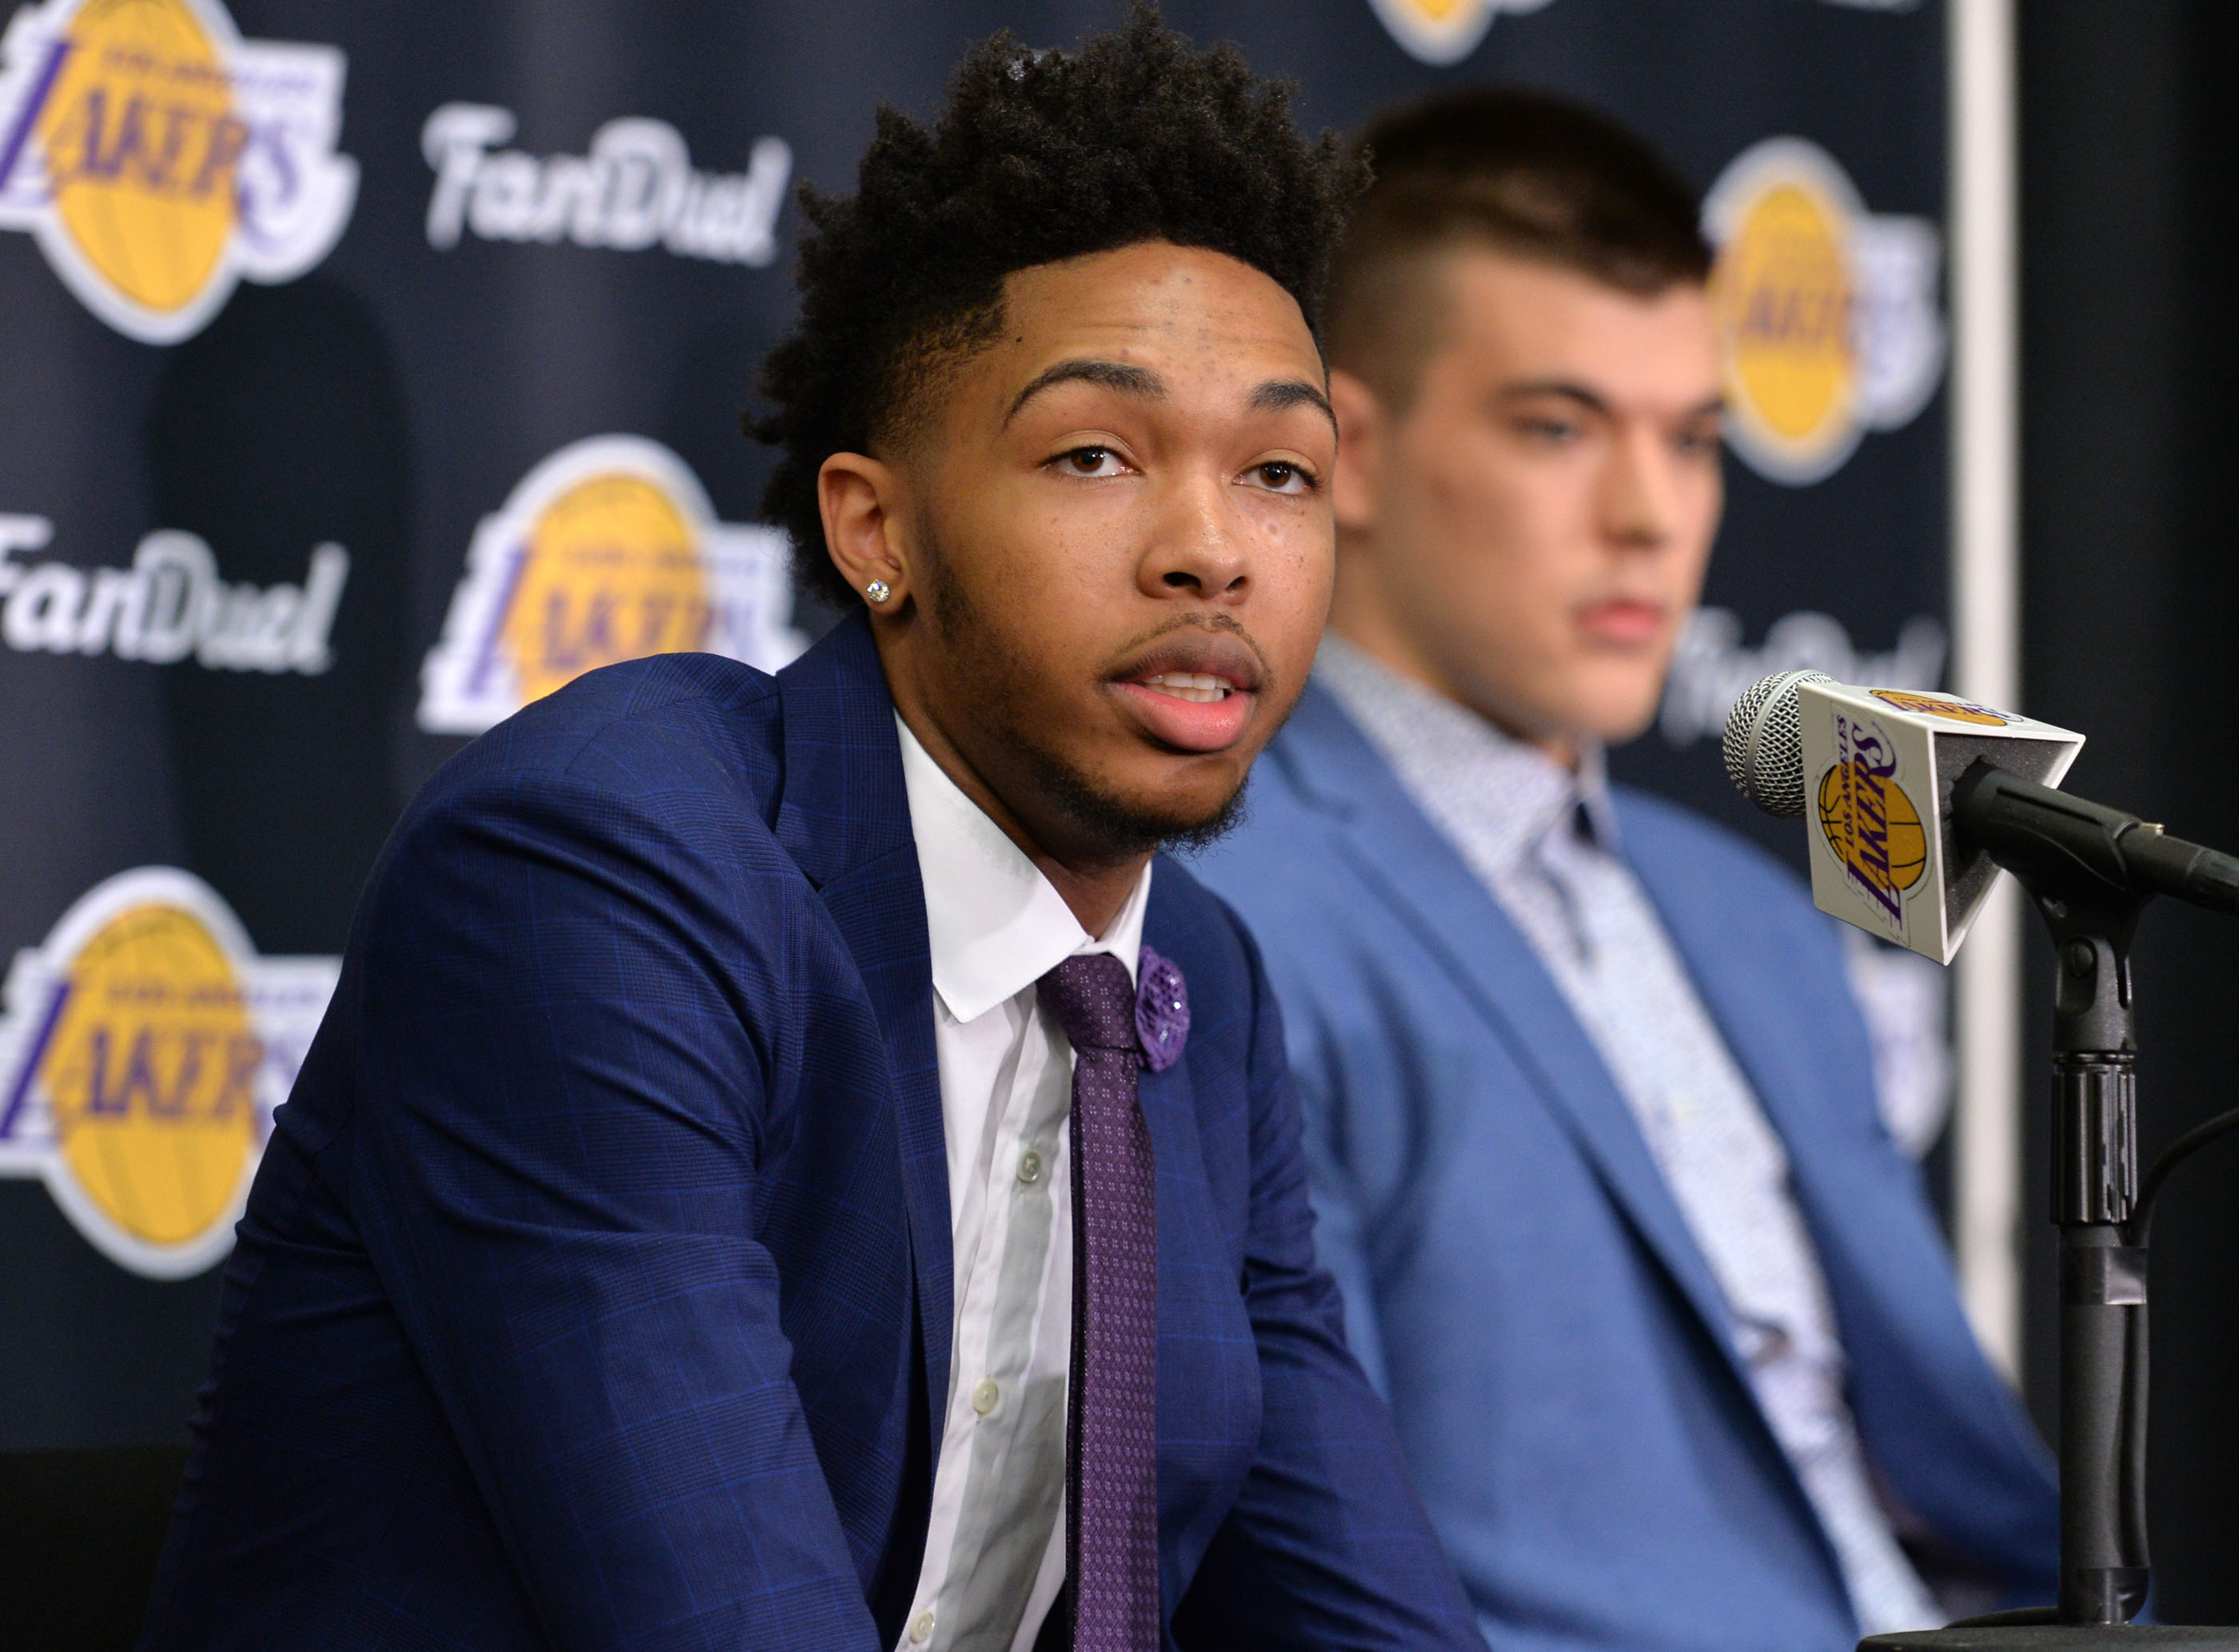 Lakers press conference to introduce 2016 draft picks Brandon Ingram and Ivica Zubac at practice facility in El Segundo Tuesday July 5, 2016. Brandon Ingram talks about his feelings coming to Lakers franchise. Photo By  Robert Casillas / SCNG